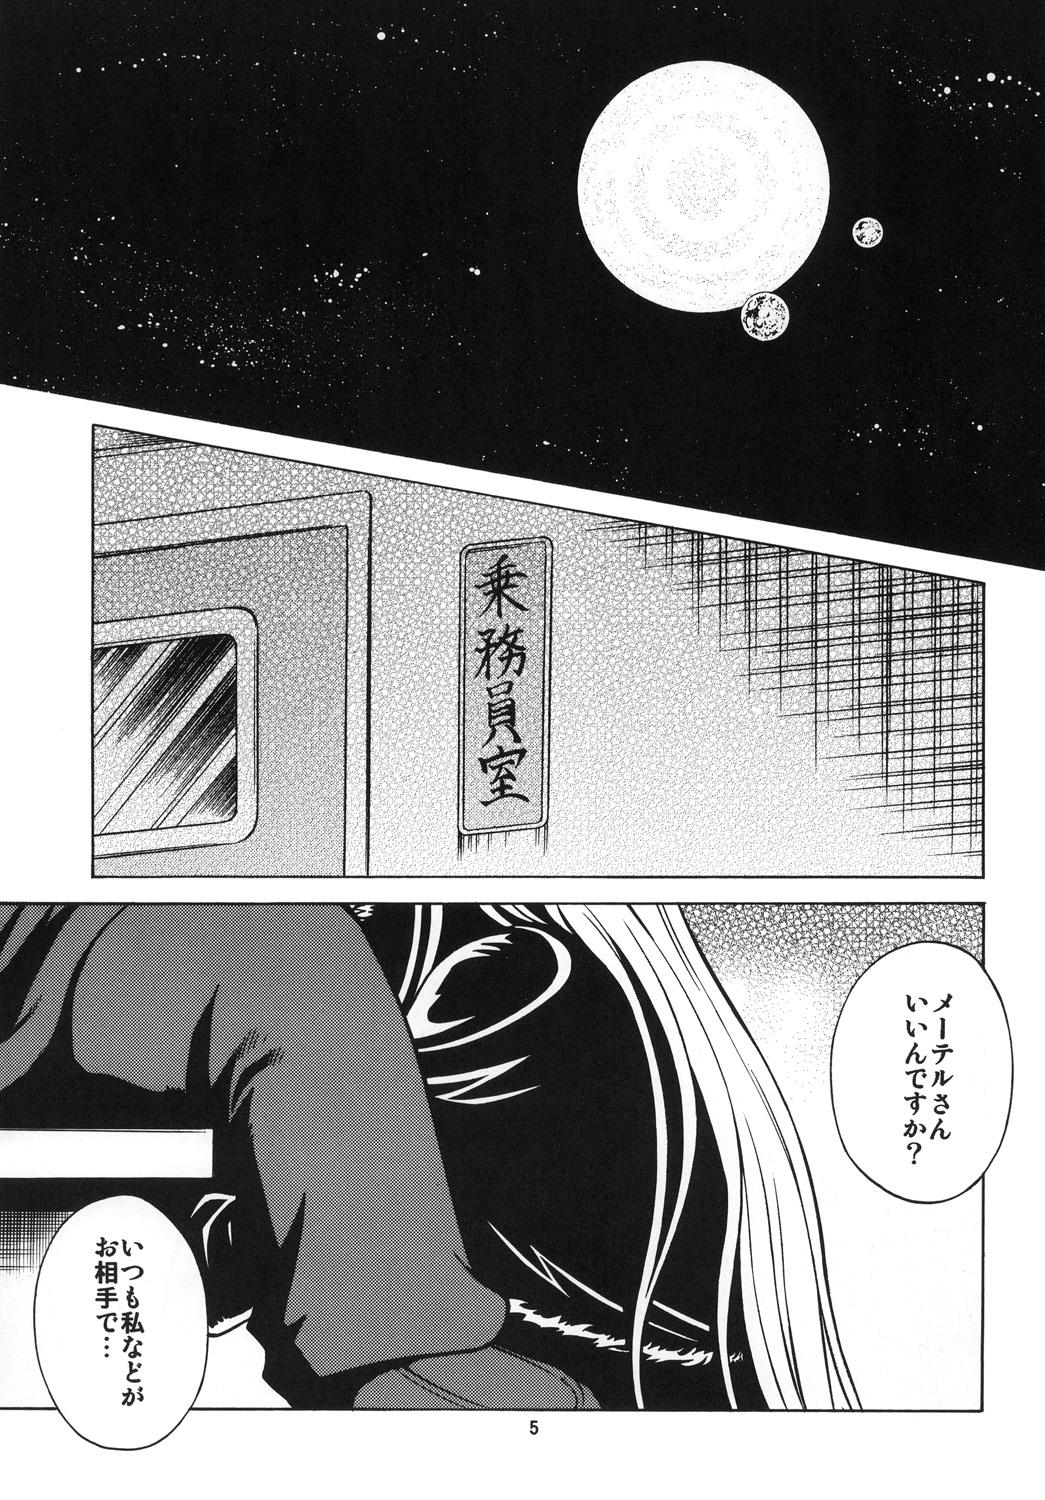 Camwhore NIGHTHEAD＋ - Galaxy express 999 Space pirate captain harlock Tight Pussy - Page 4